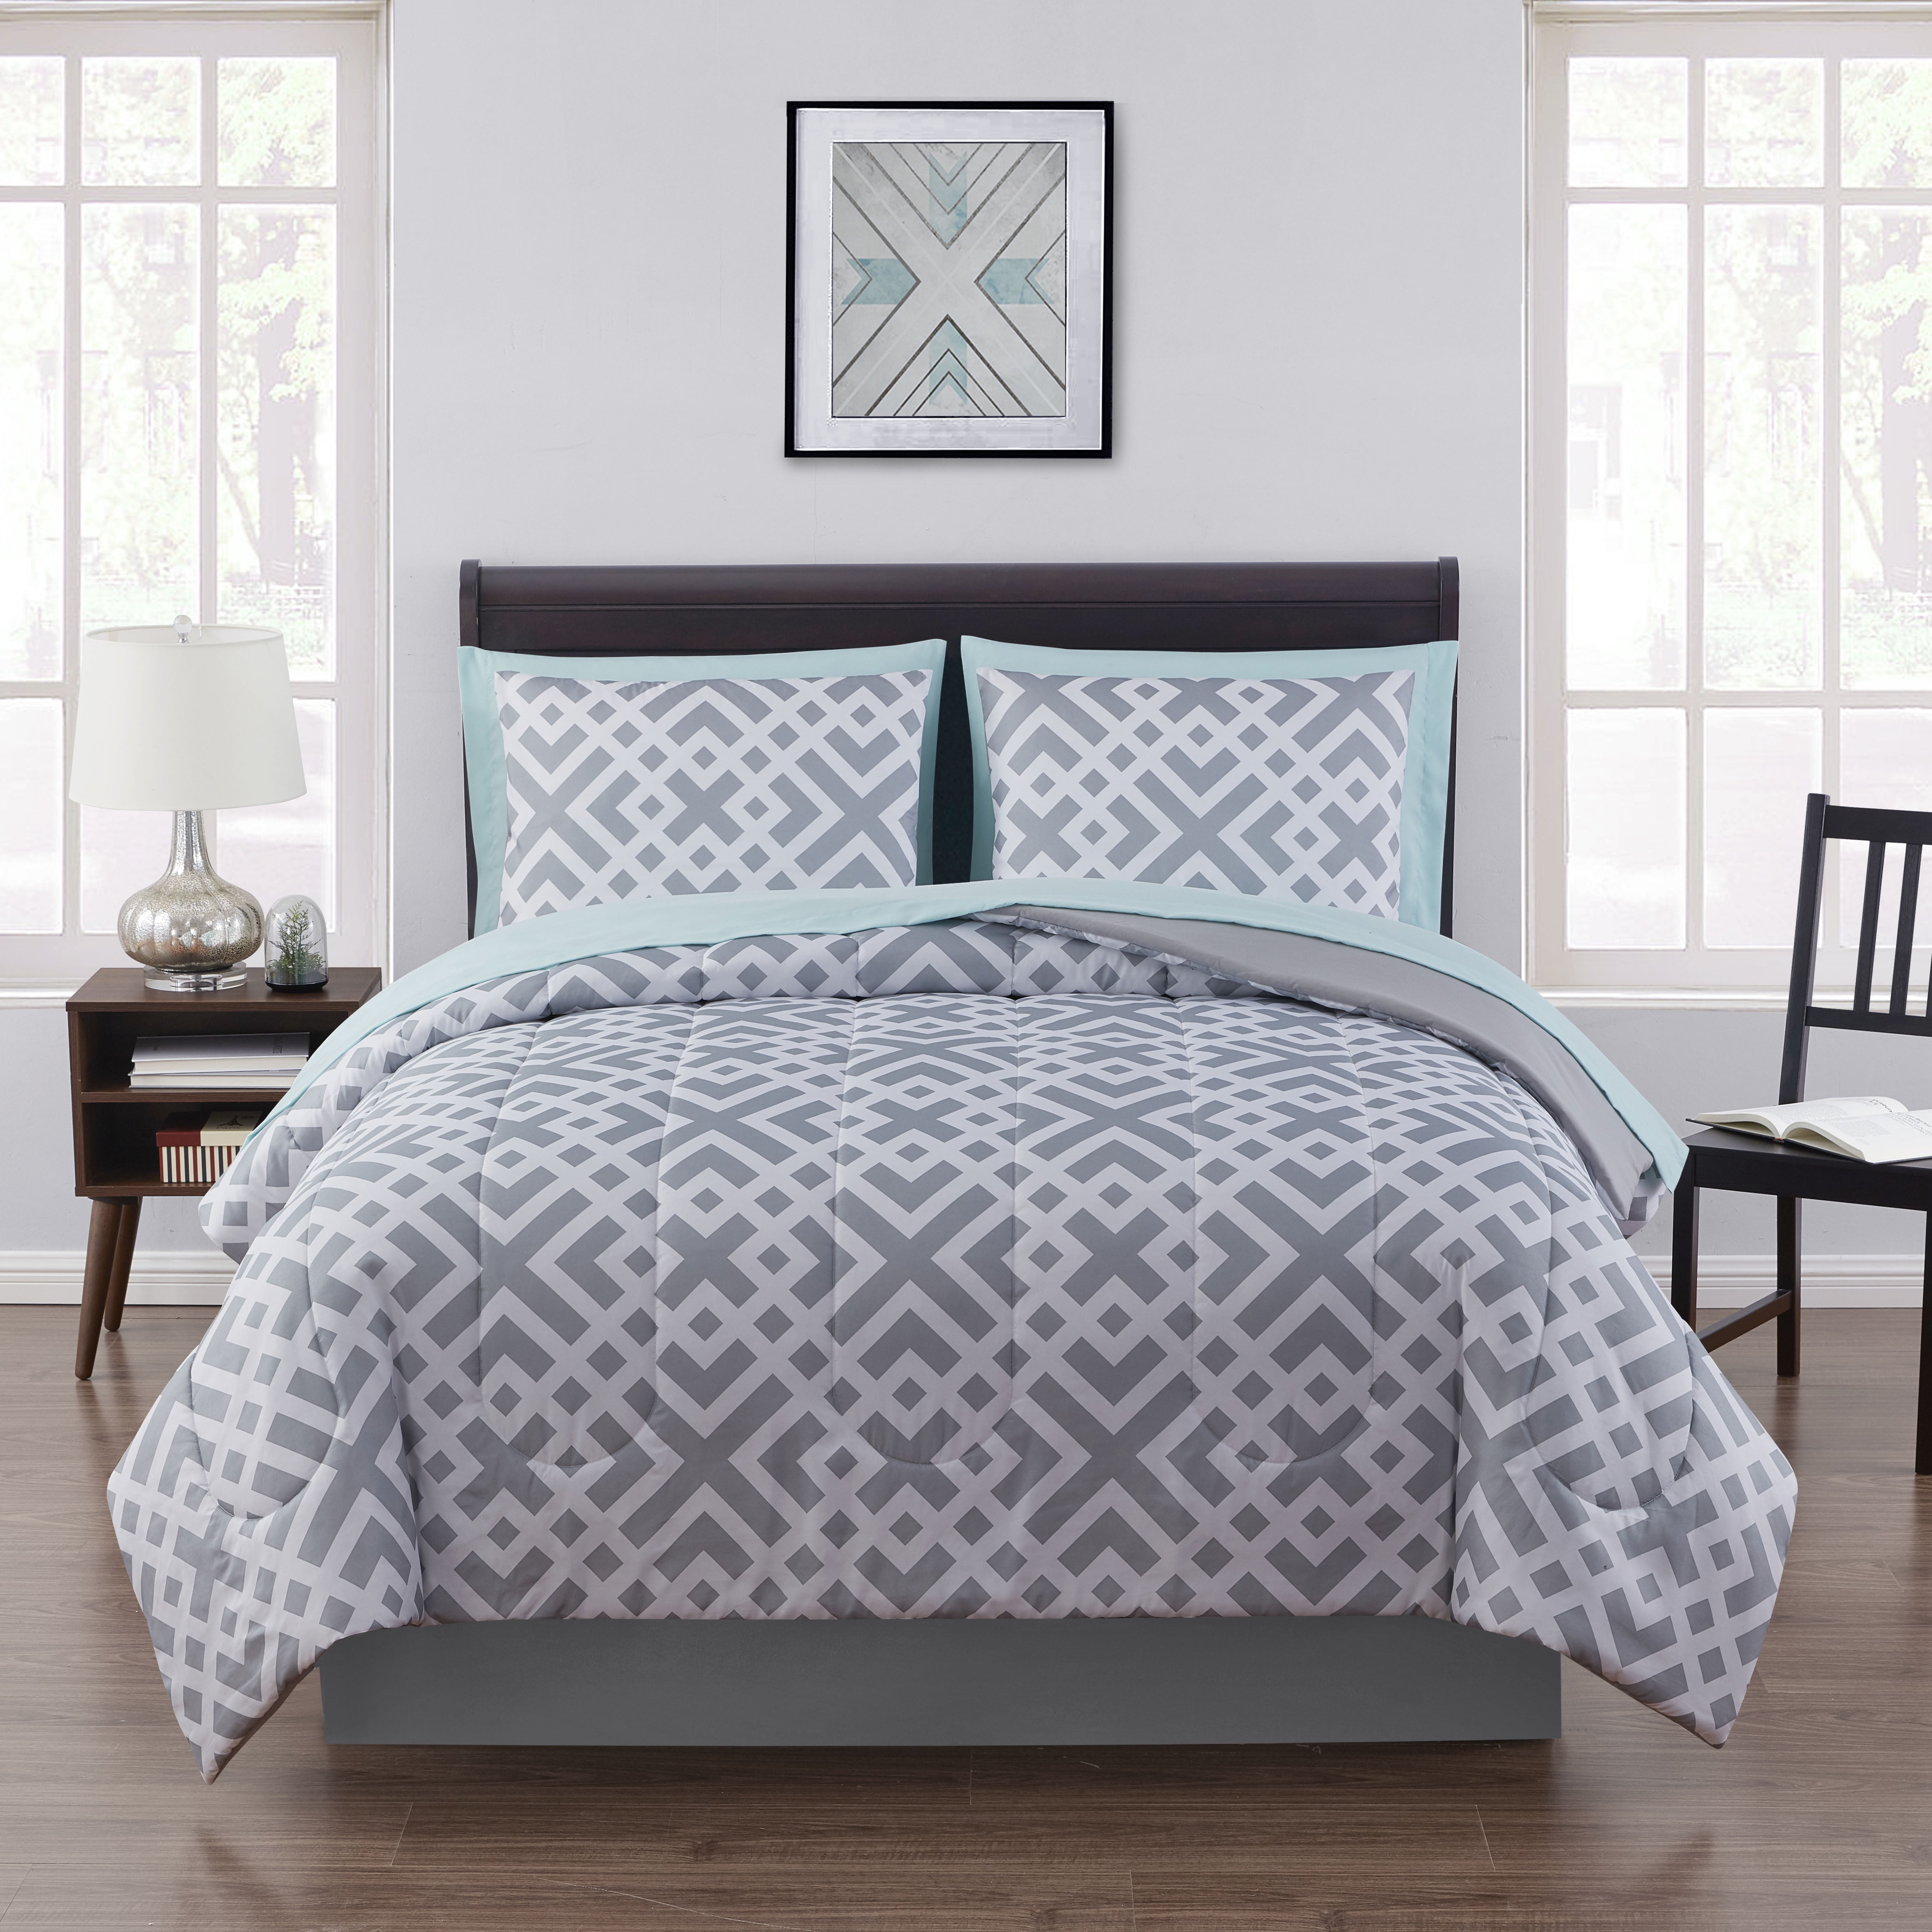 Details about   Grey & Teal 8 pc Bed in a Bag Bedding Set with Sheet Set Full Alternative Soft 